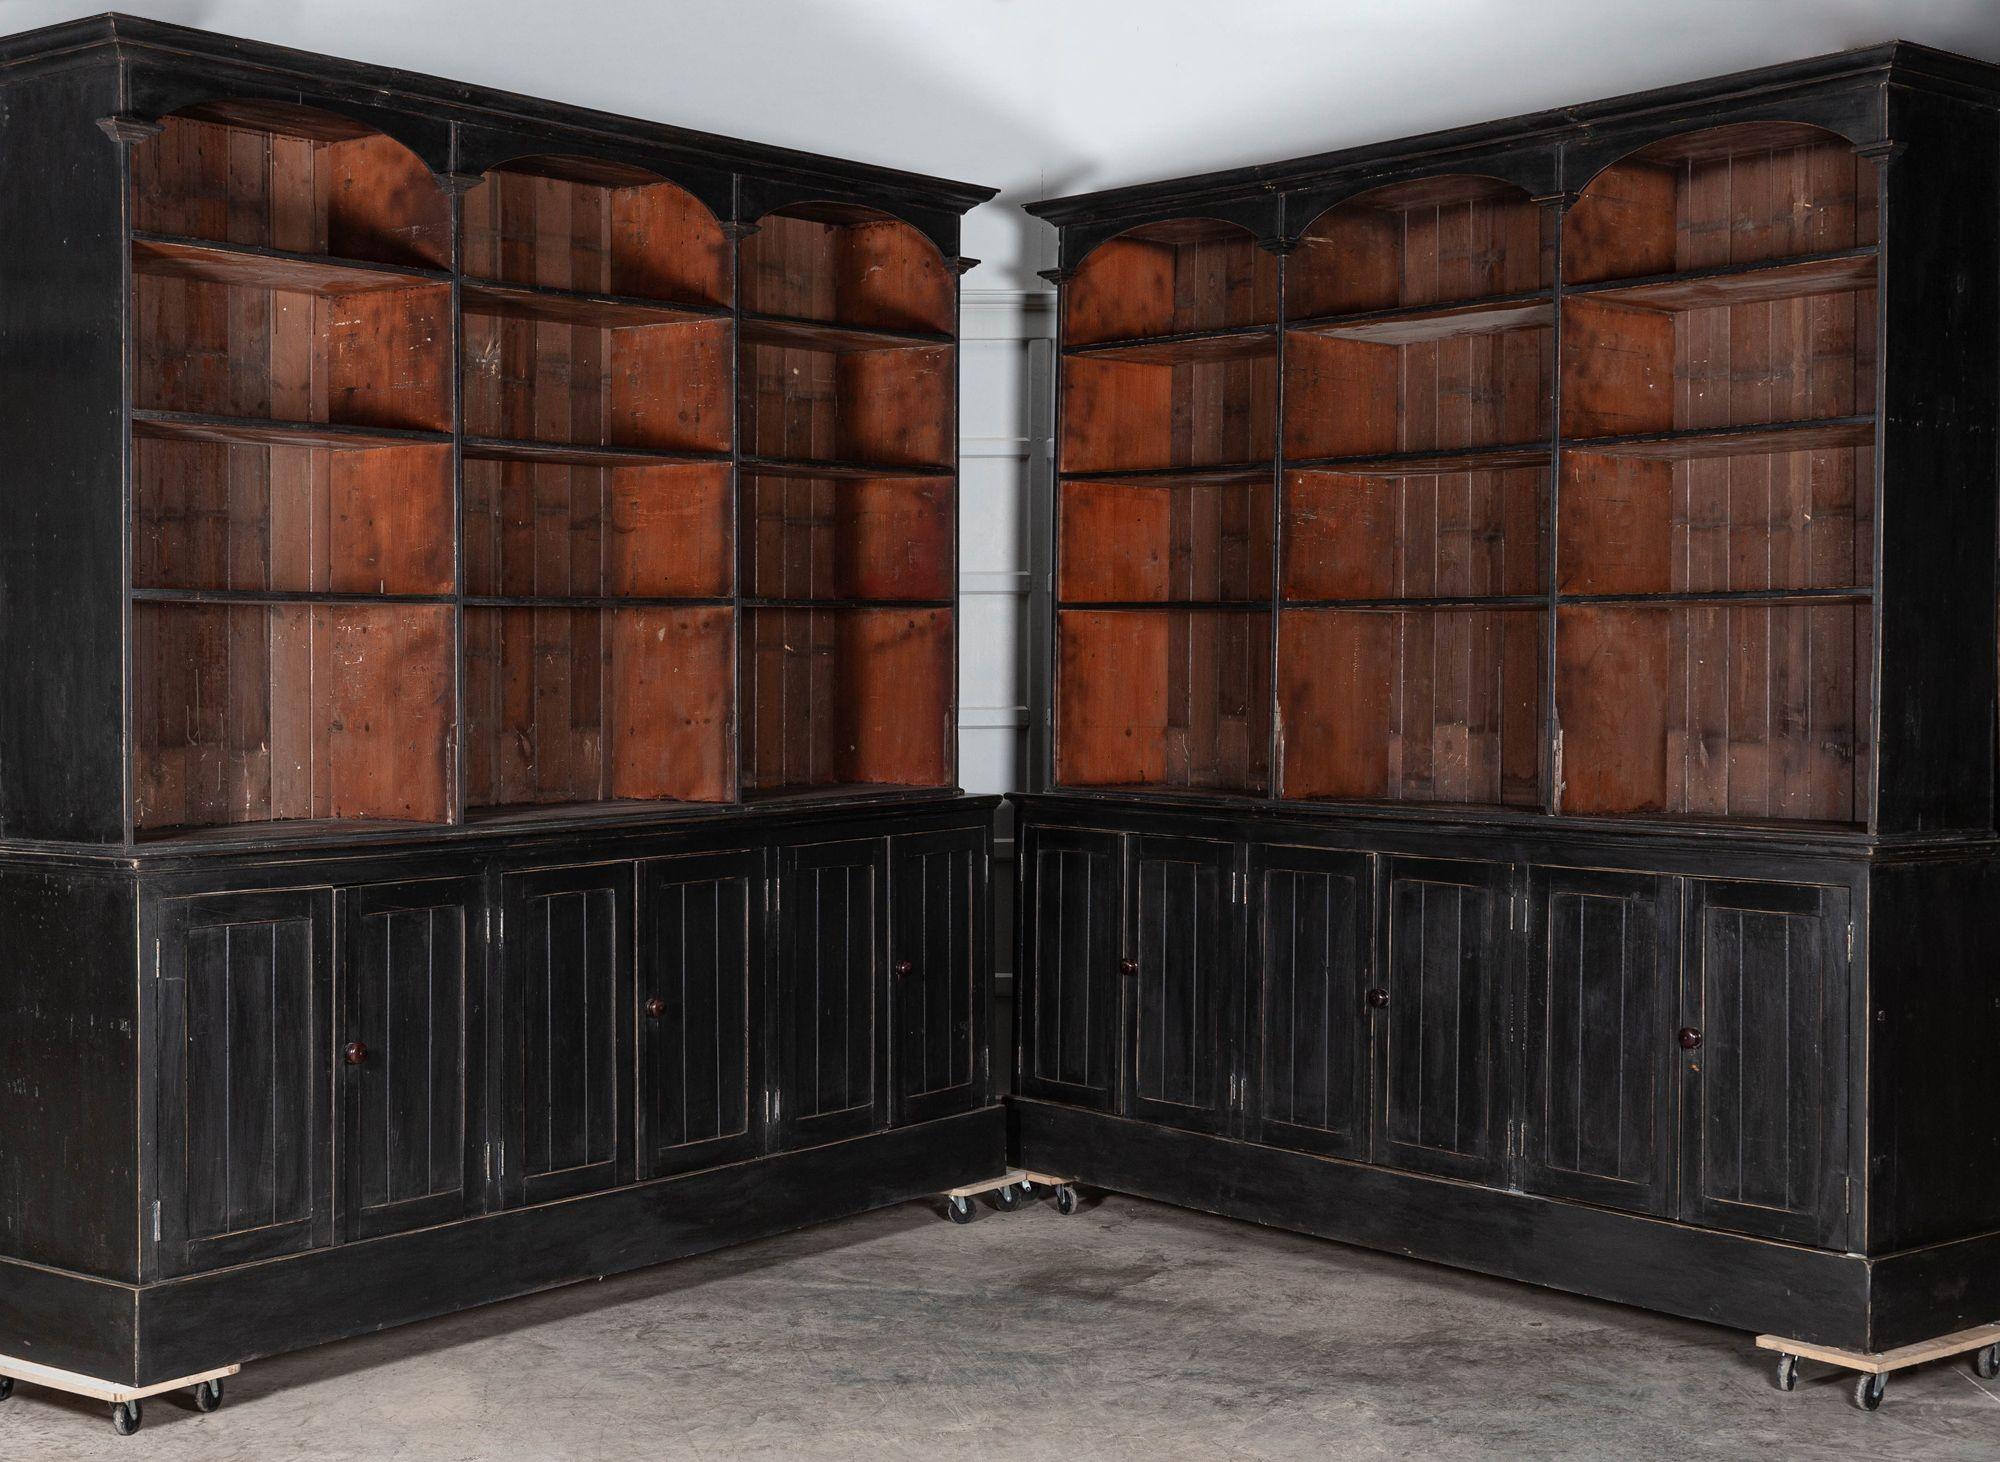 circa 1915
Monumental English Ebonised Bookcase / Display Cabinet
Provenance: Huge original shop fittings from the former Co-operative Society building, Swadlincote, Derbyshire, England, UK.
The former Midland Co-op, in West Street, was built on the